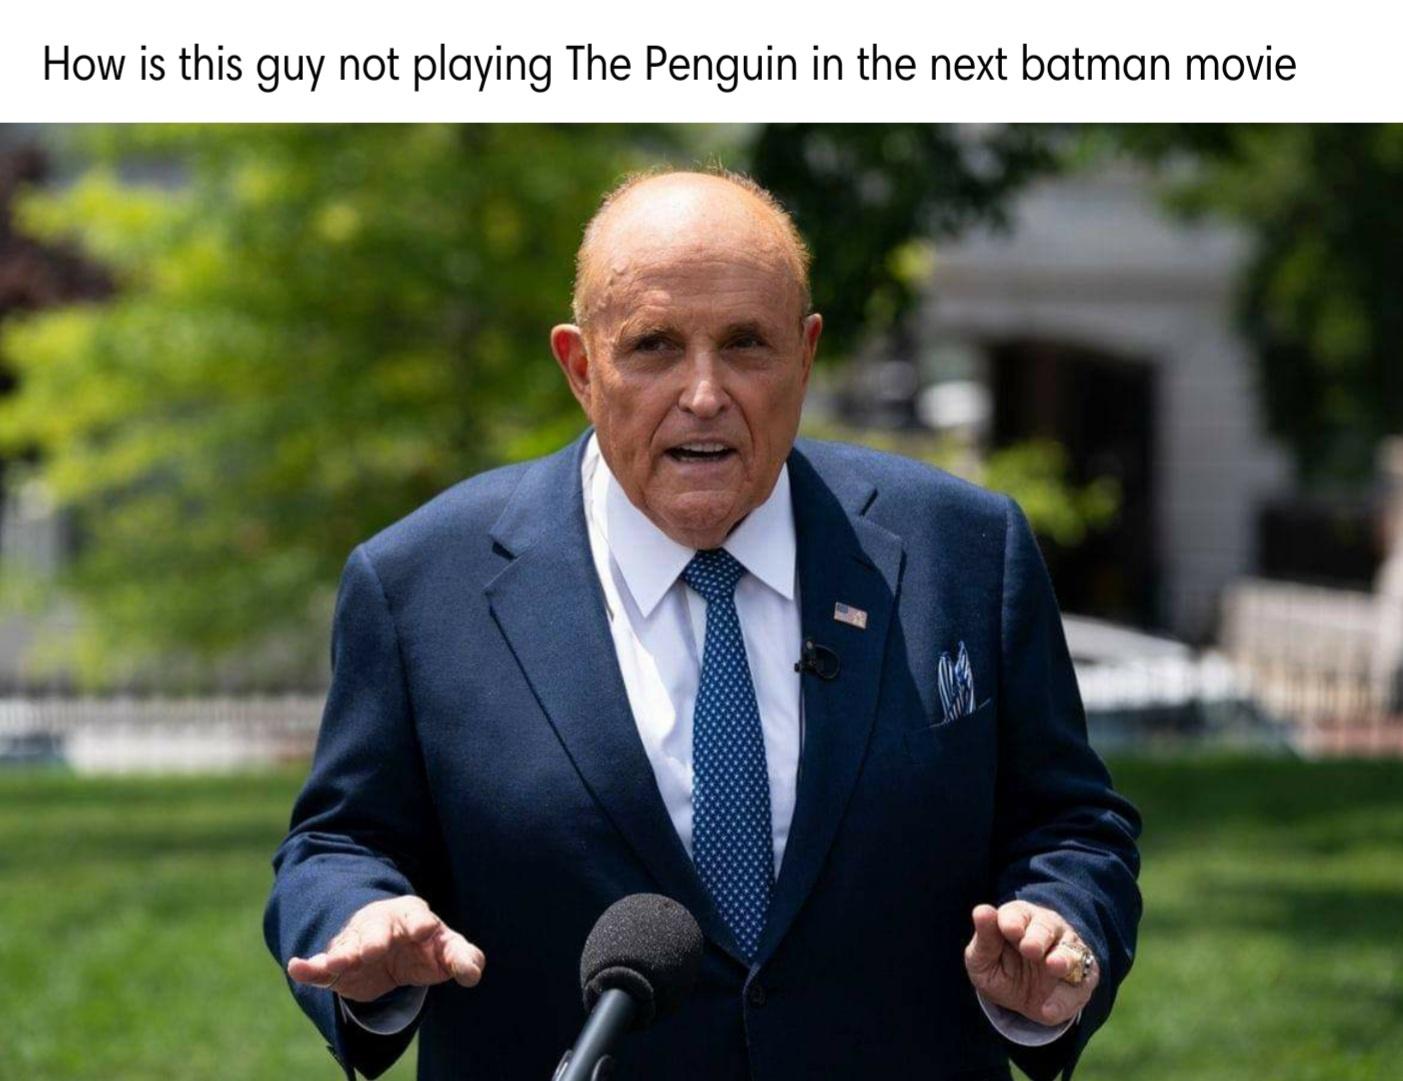 rudy giuliani - How is this guy not playing The Penguin in the next batman movie